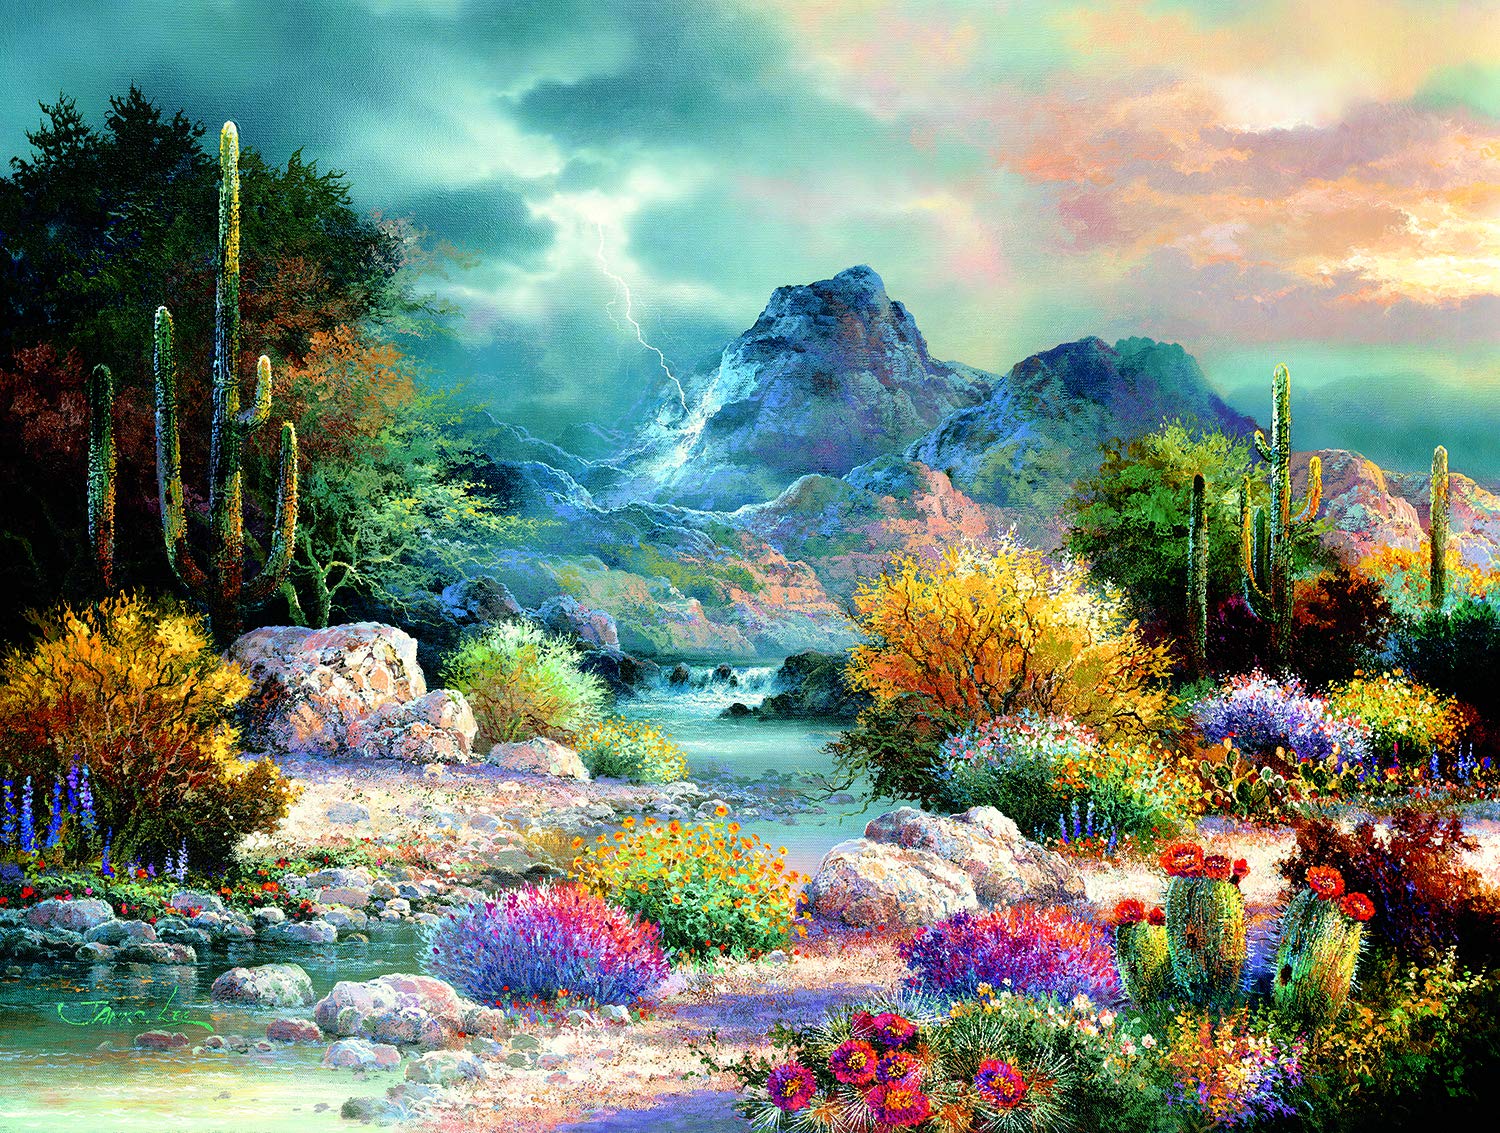 SUNSOUT INC - Springtime Valley - 300 pc Jigsaw Puzzle by Artist: James Lee - Finished Size 18" x 24" - MPN# 18017 - image 1 of 5